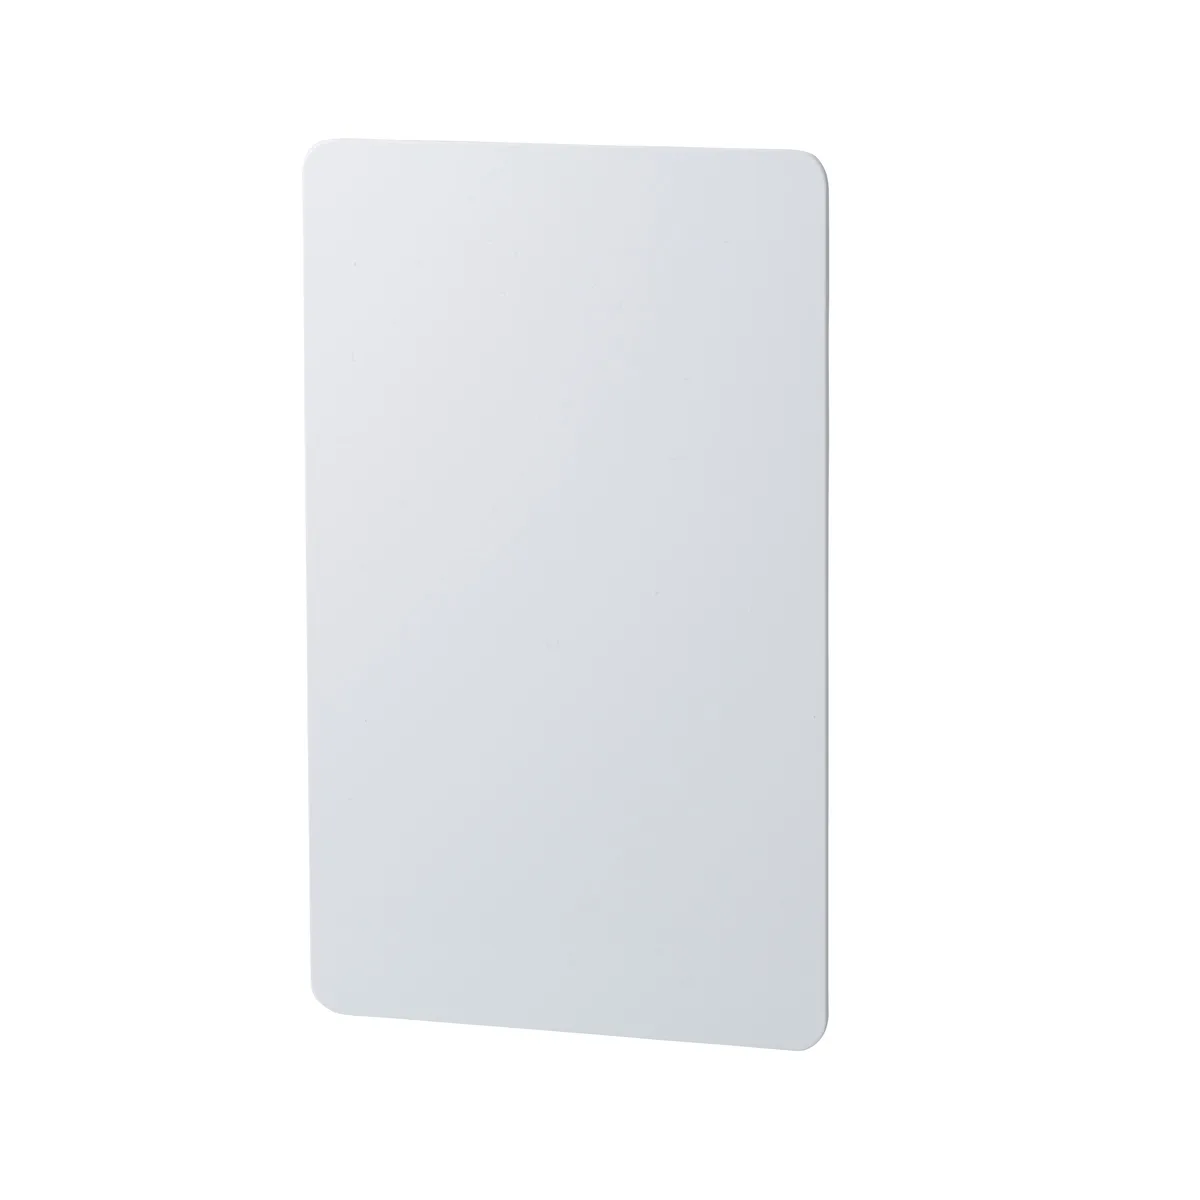 PSI-4 Image Technology Proximity Card, Pack of 100